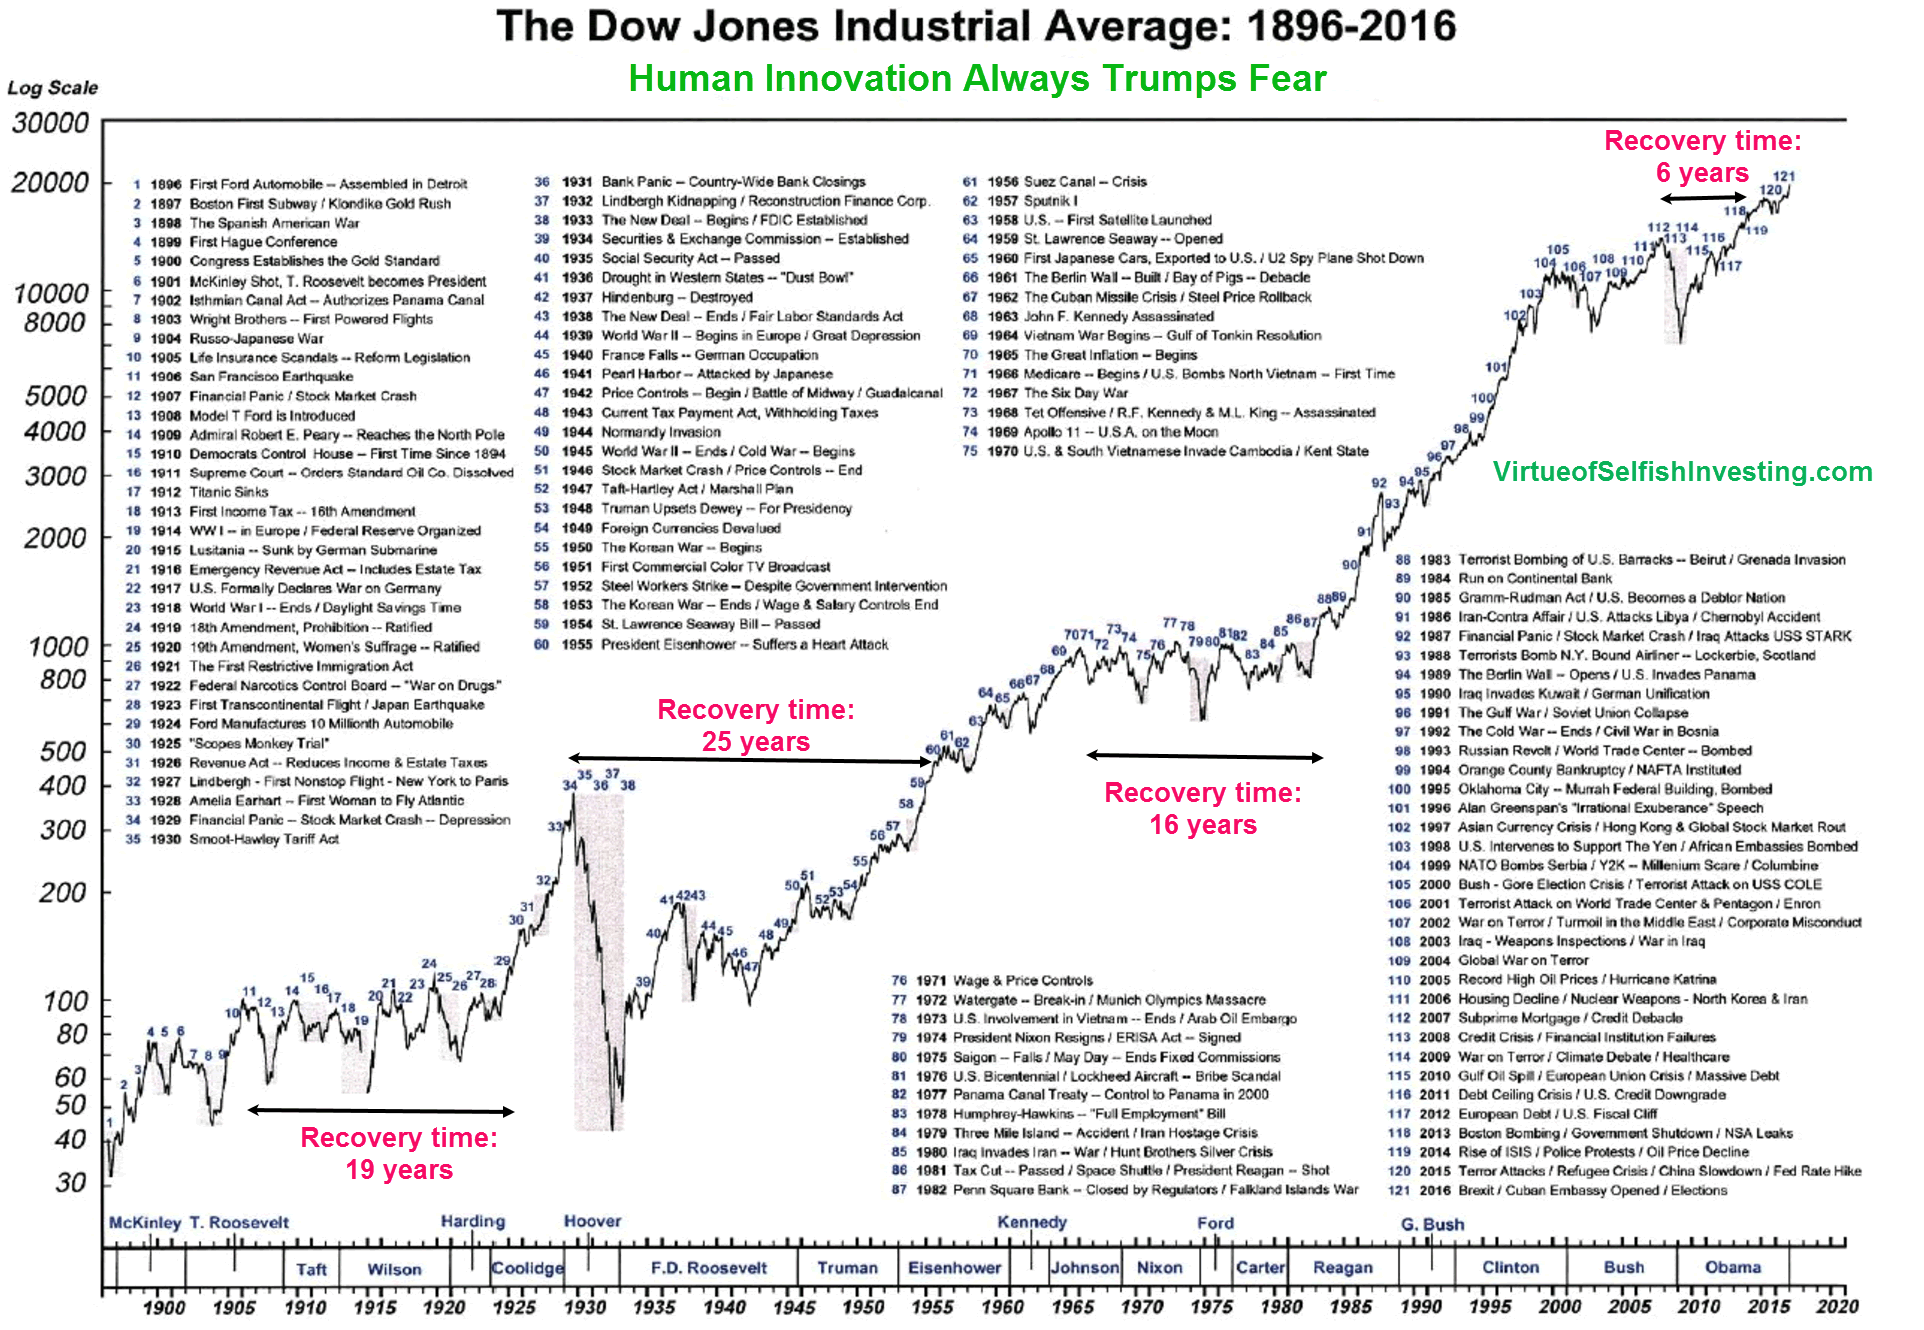 The Dow’s tumultuous 120-year history, in one chart1924 x 1330